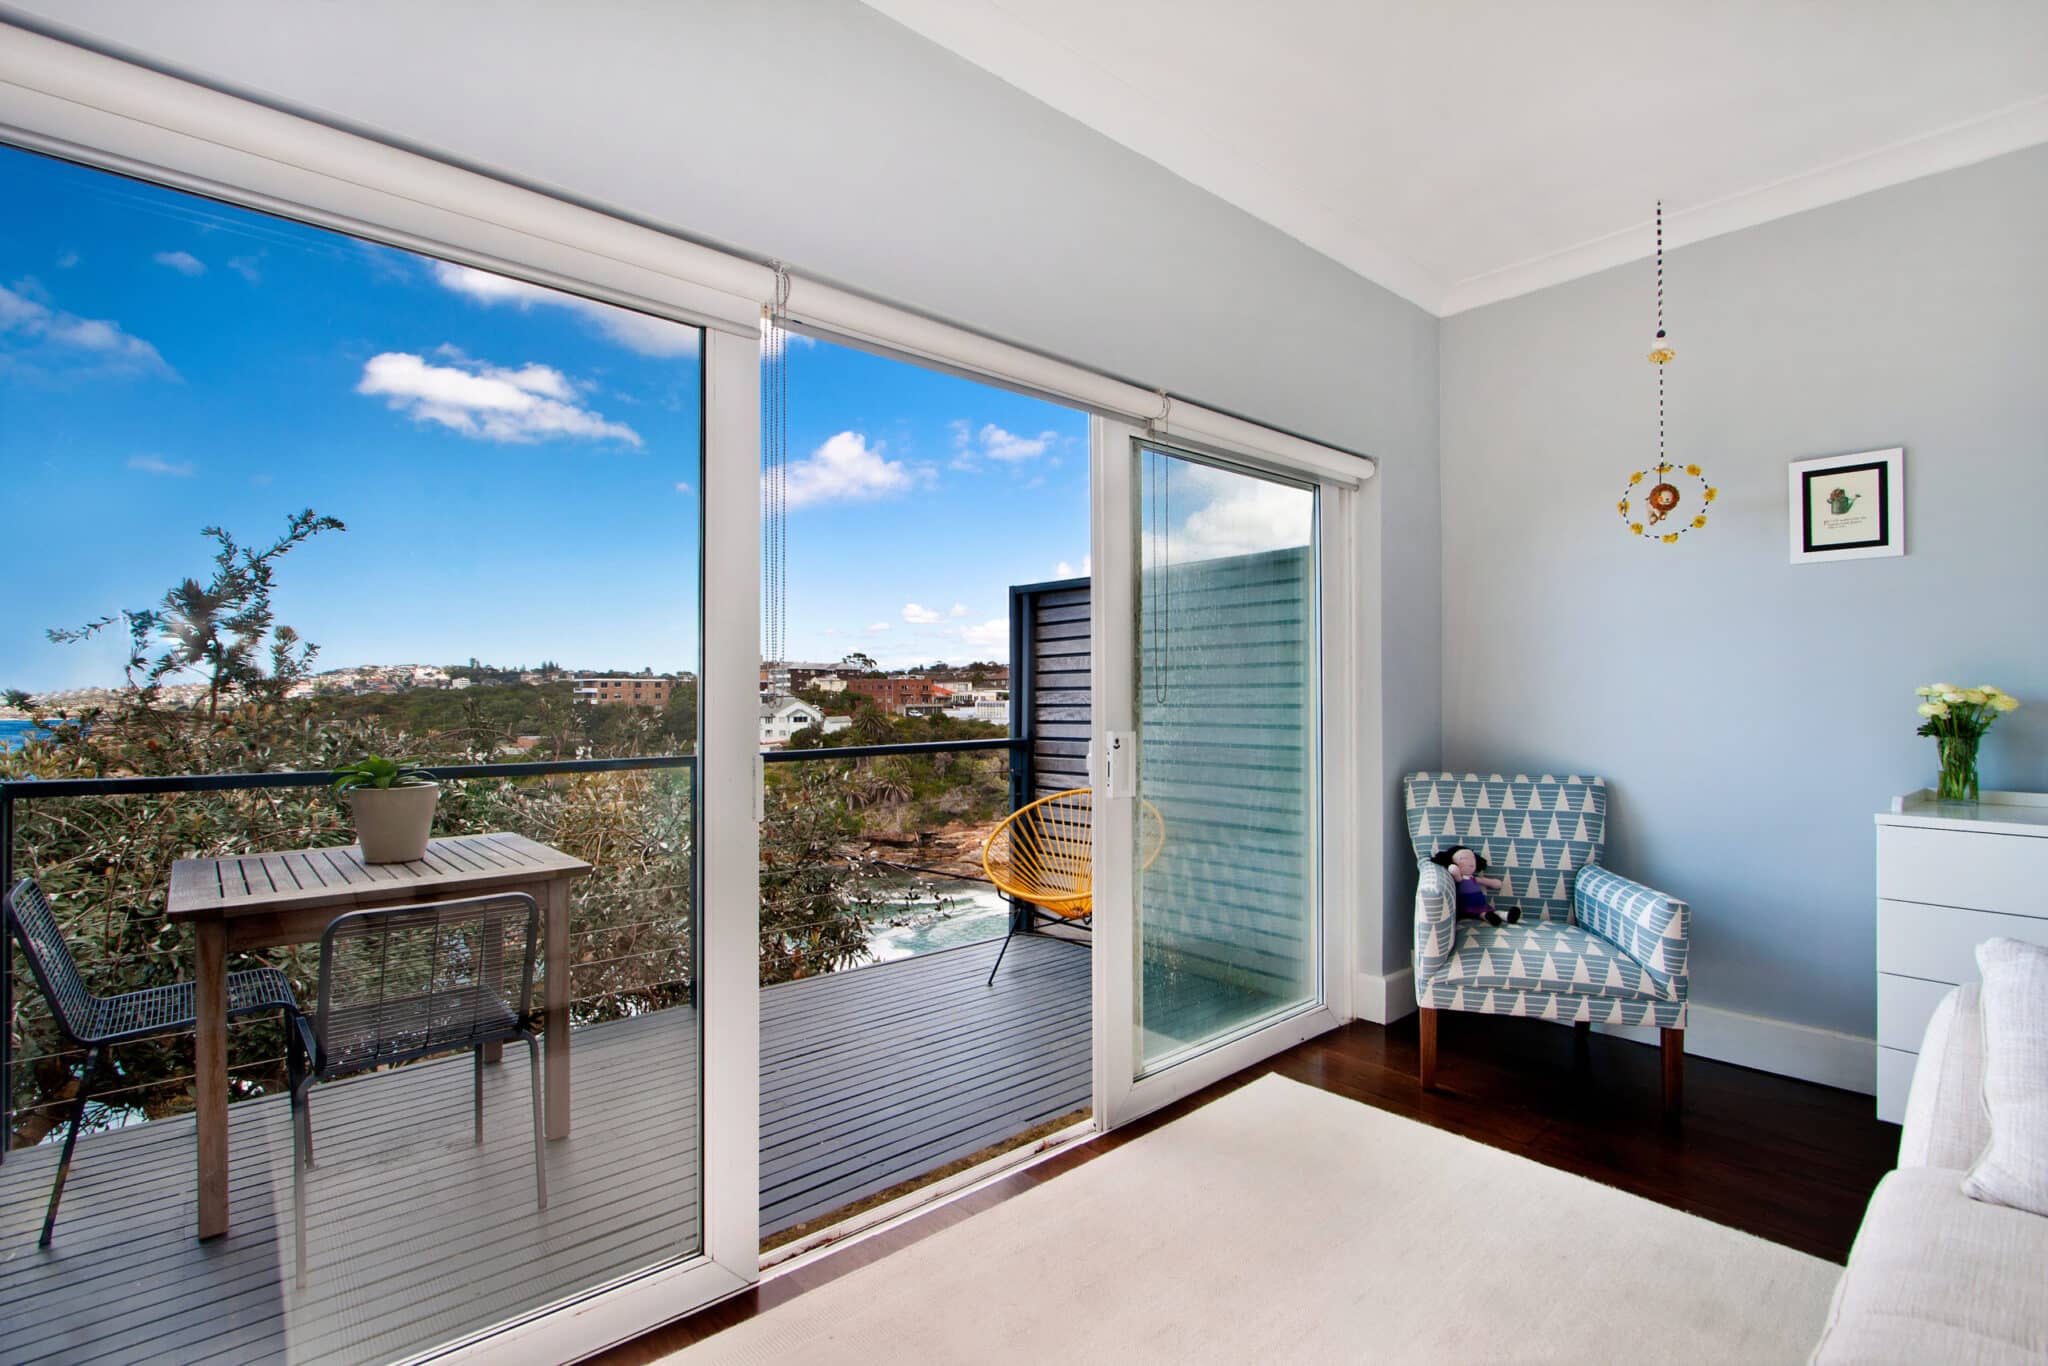 A big sliding glass patio door with a great view.